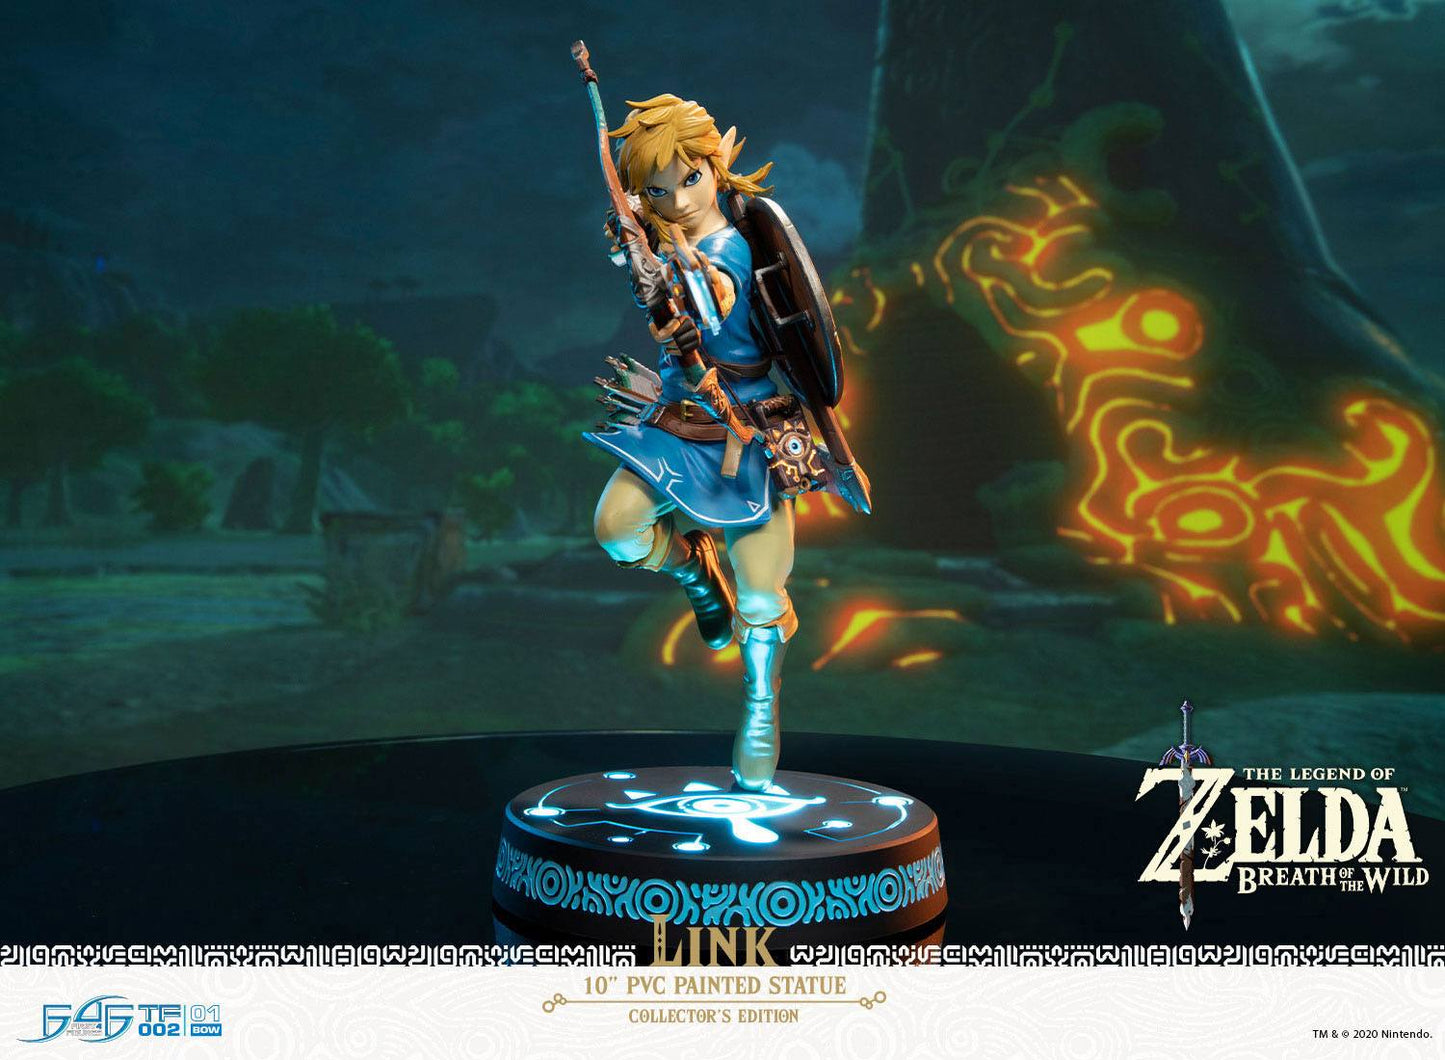 Link - Collector's Edition - First 4 Figures